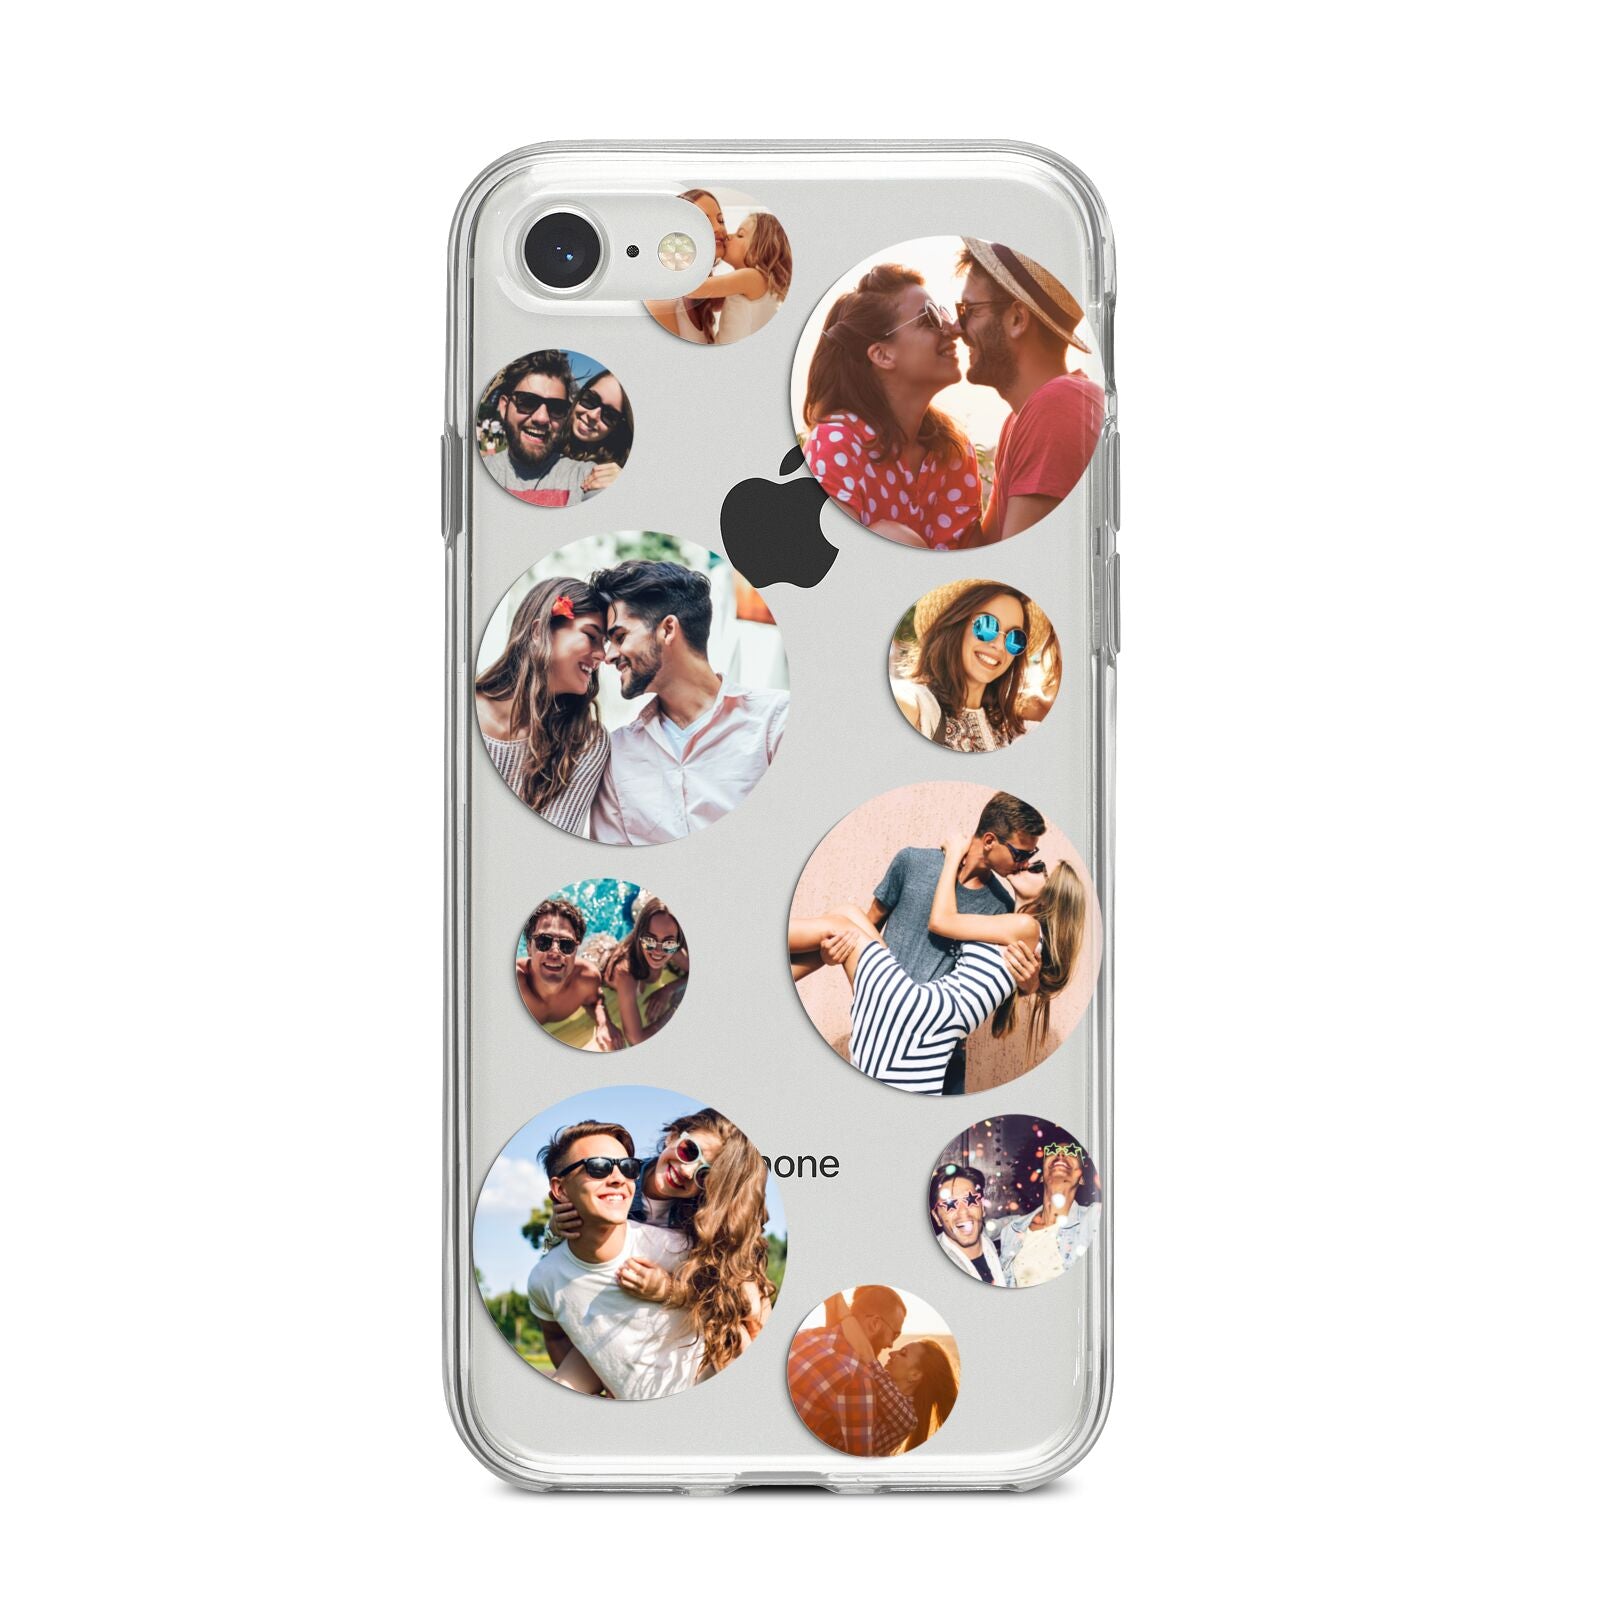 Multi Circular Photo Collage Upload iPhone 8 Bumper Case on Silver iPhone